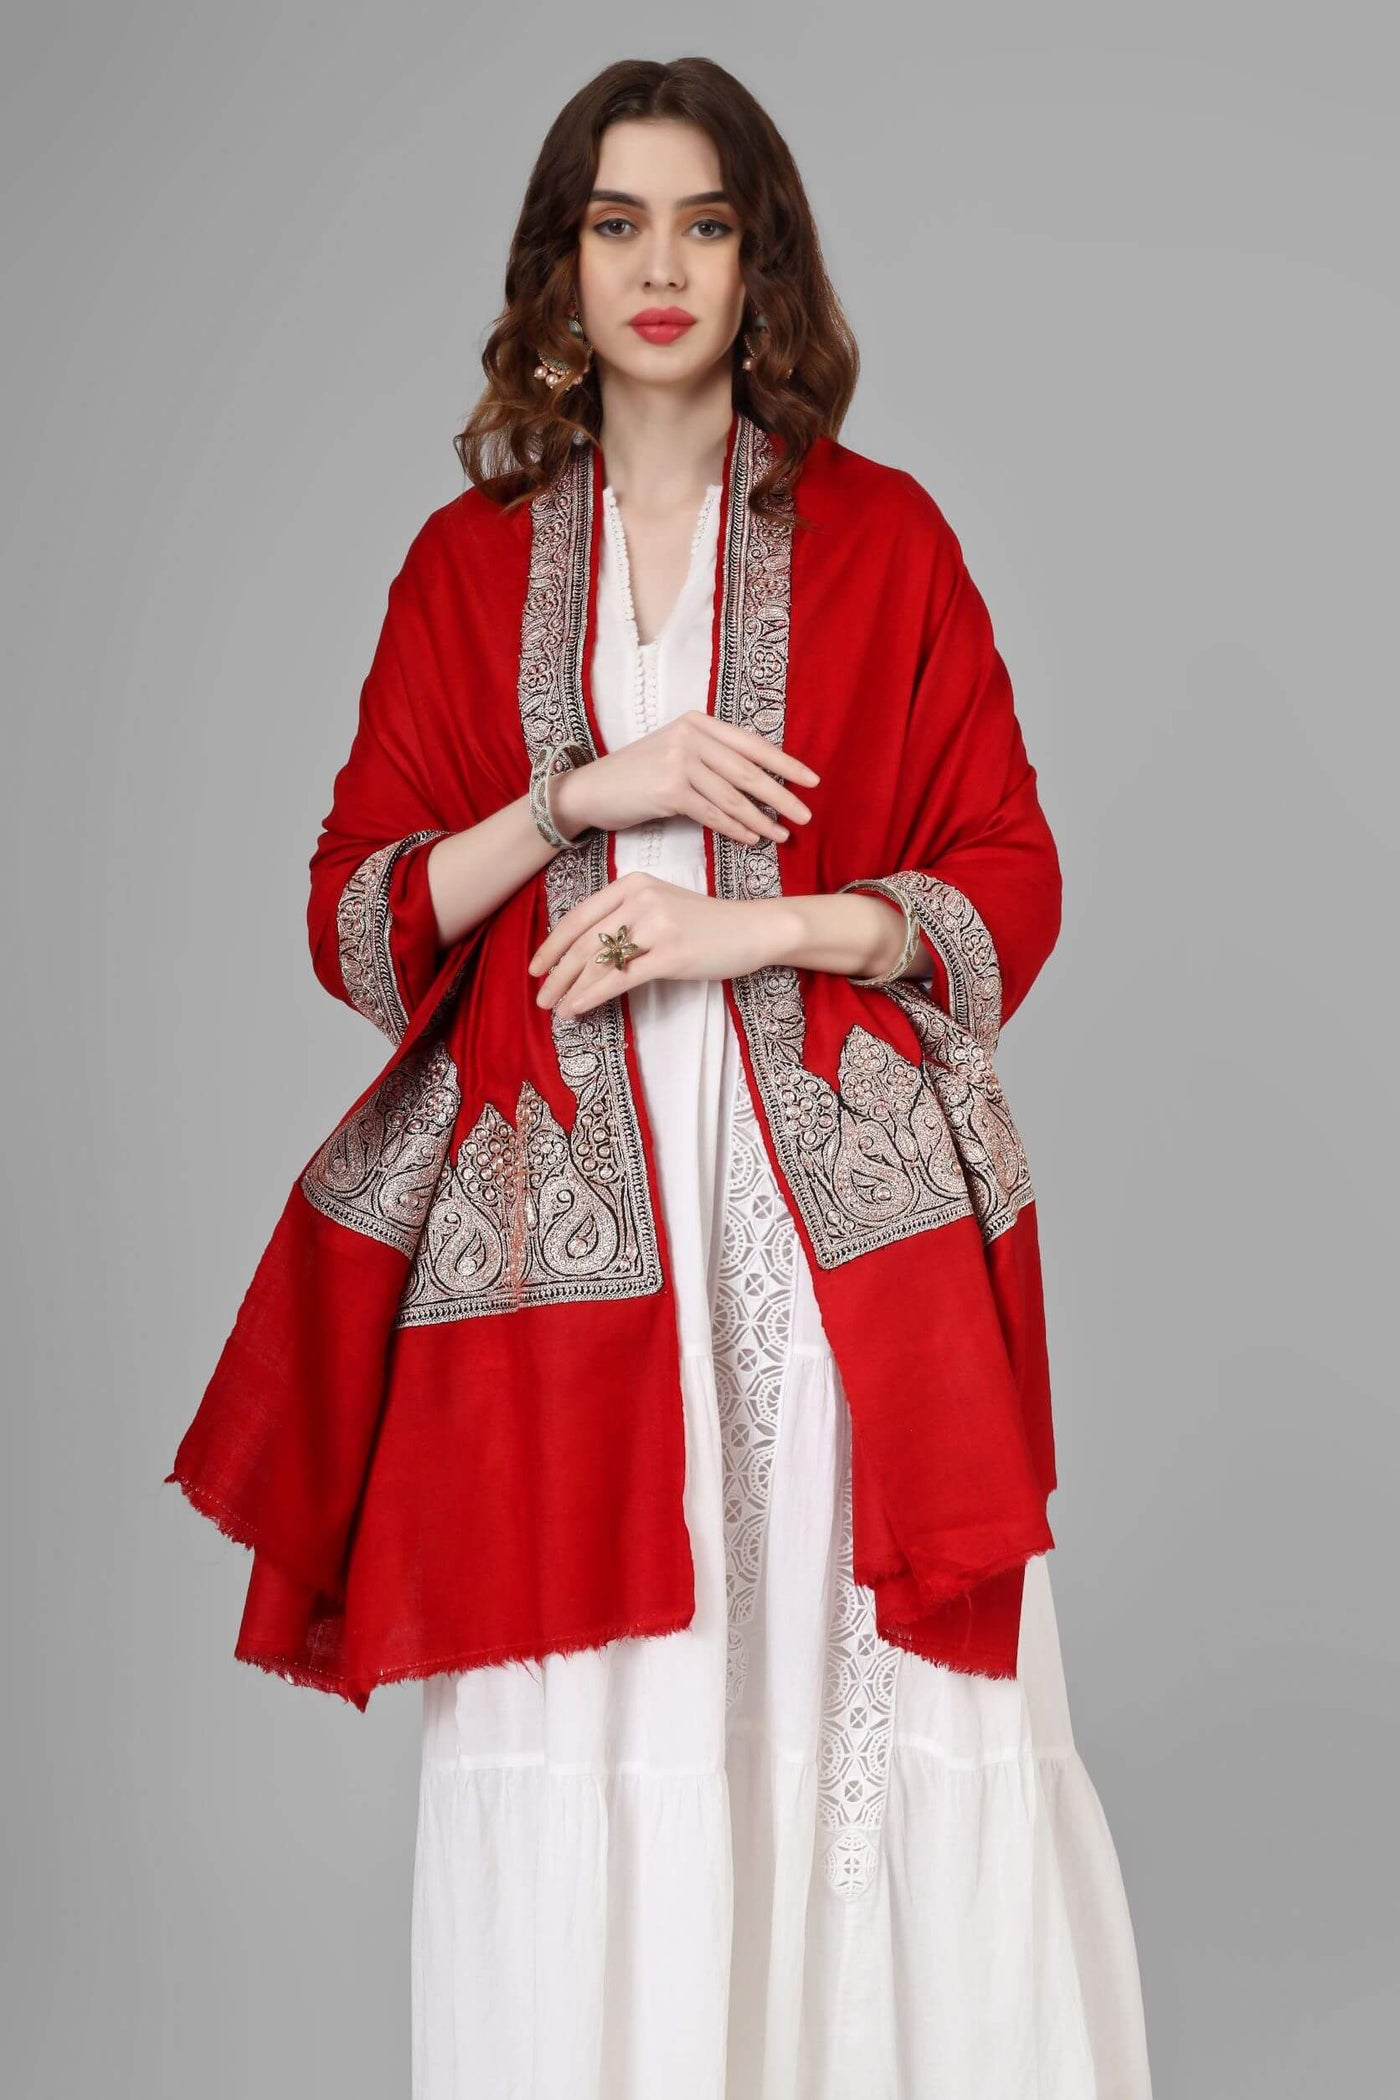  In conclusion, if you want to indulge in timeless elegance and luxury, a handmade Kashmiri pashmina shawl is the perfect accessory for you. With these intricate embroidery designs, the red tilla traditional design. Visit our pashmina store today to browse our selection and find the perfect shawl for you.